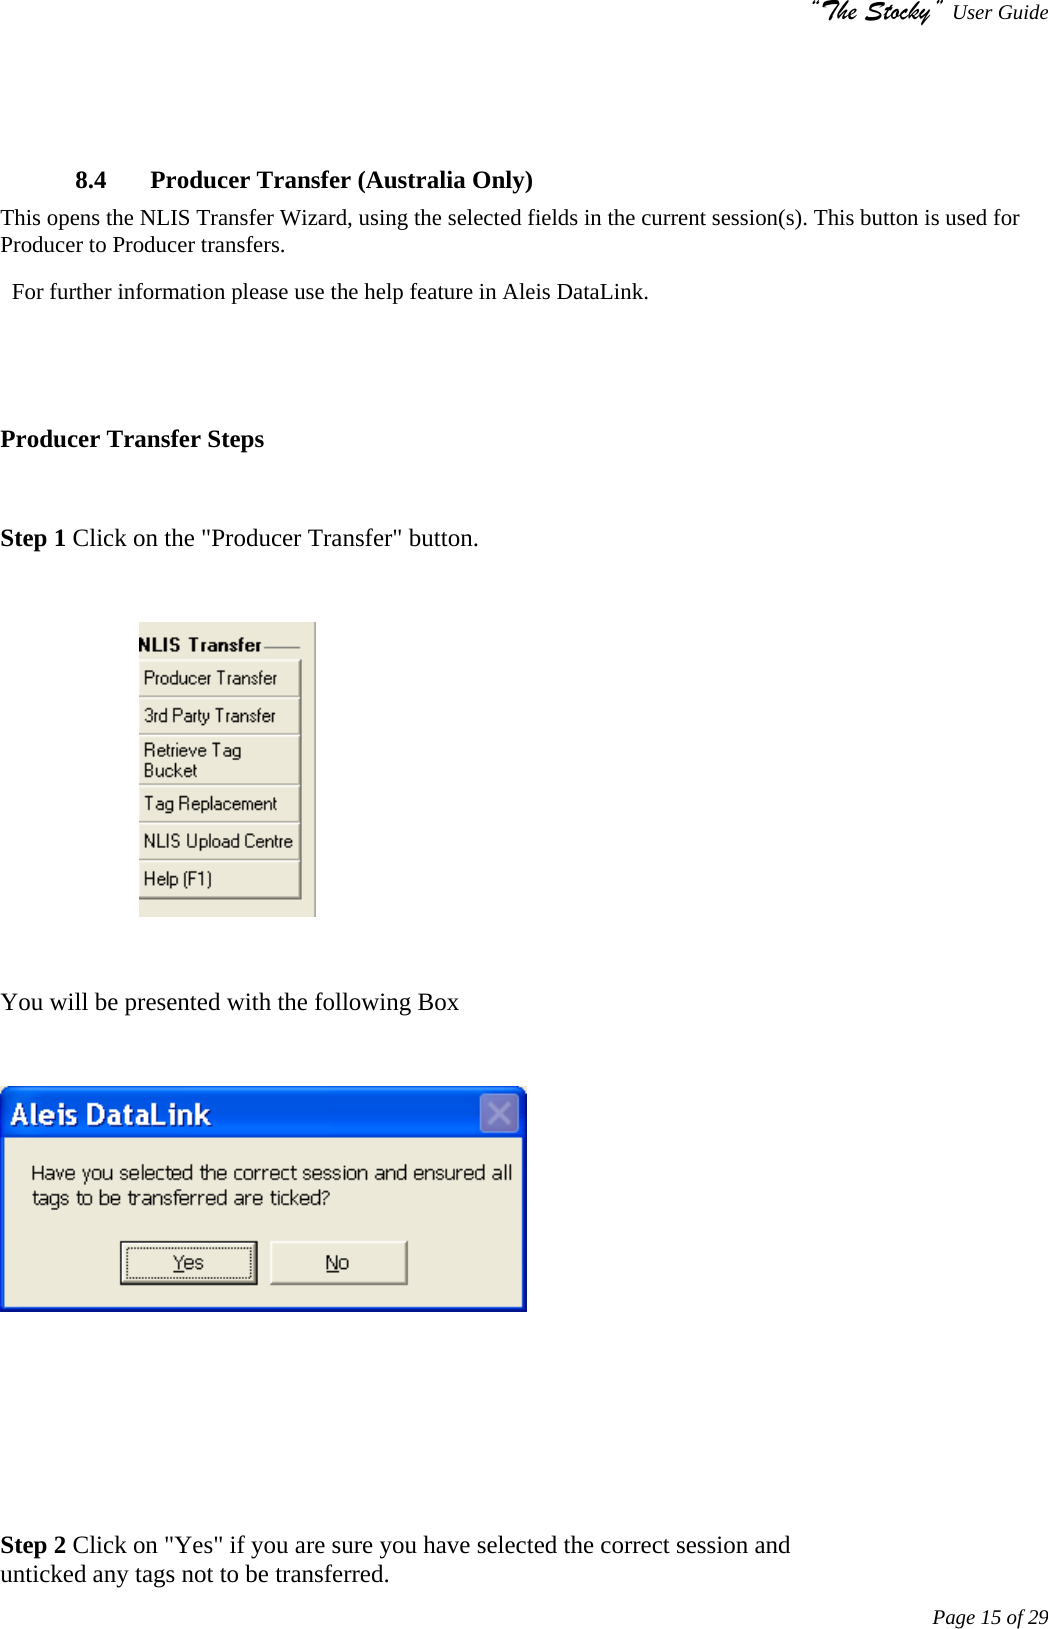 “The Stocky” User Guide     Page 15 of 29      8.4  Producer Transfer (Australia Only) This opens the NLIS Transfer Wizard, using the selected fields in the current session(s). This button is used for Producer to Producer transfers.                                                                                                                           For further information please use the help feature in Aleis DataLink.    Producer Transfer Steps  Step 1 Click on the &quot;Producer Transfer&quot; button.                         You will be presented with the following Box       Step 2 Click on &quot;Yes&quot; if you are sure you have selected the correct session and                                      unticked any tags not to be transferred.  